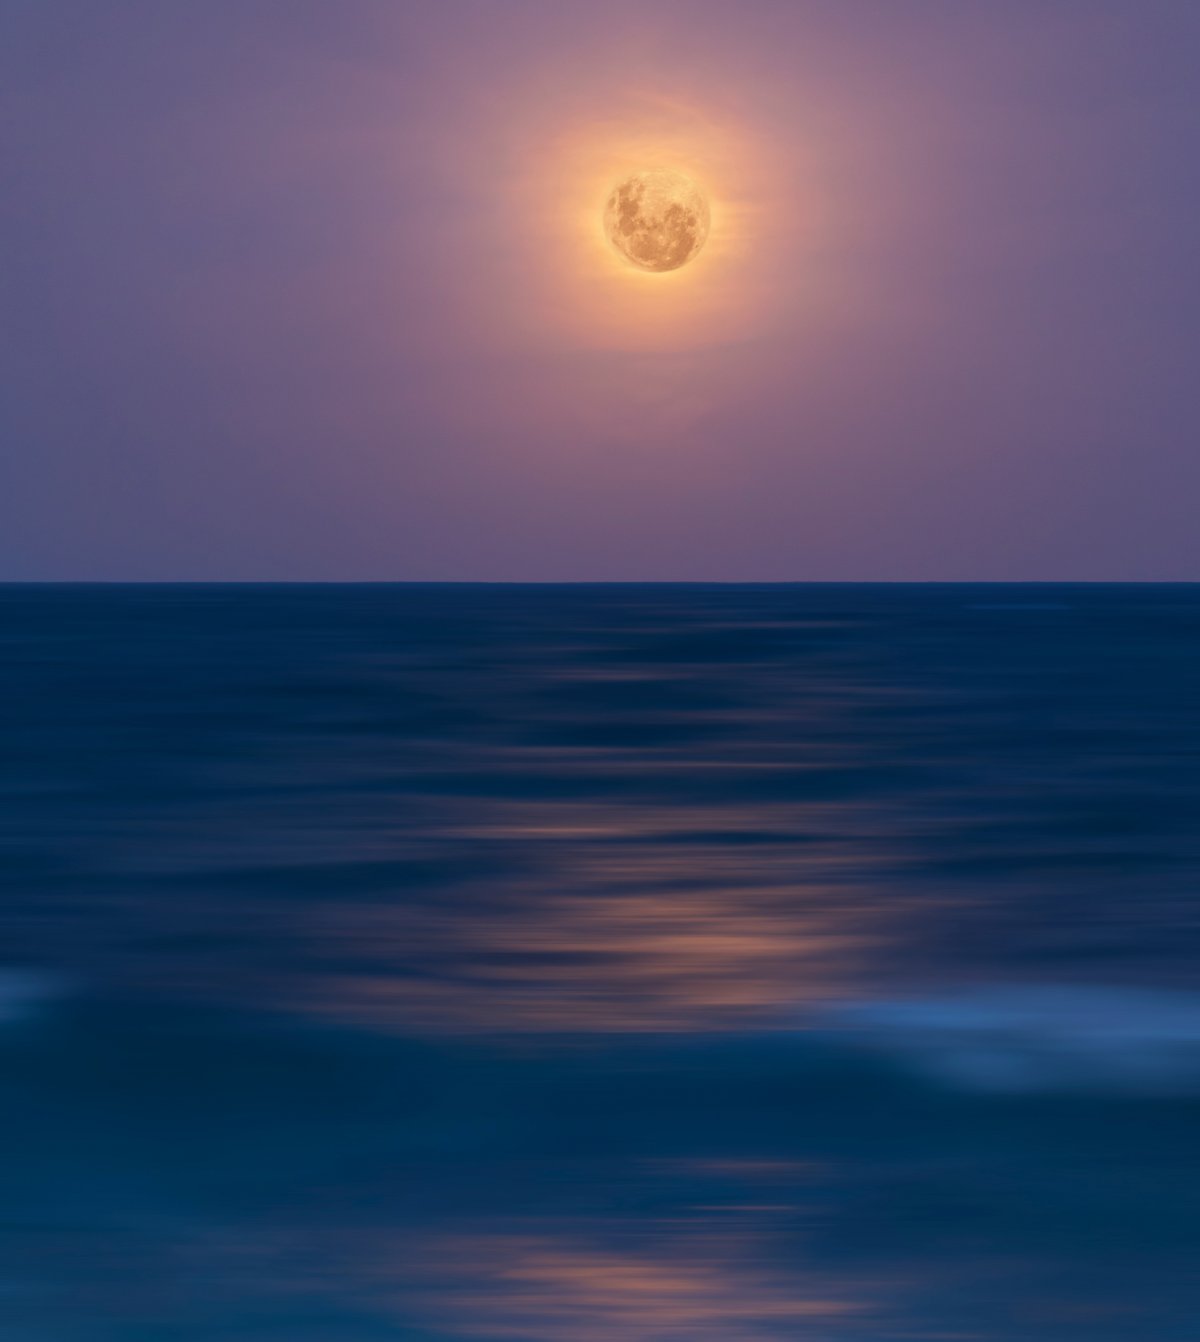 HD pictures of the bright moon on the sea